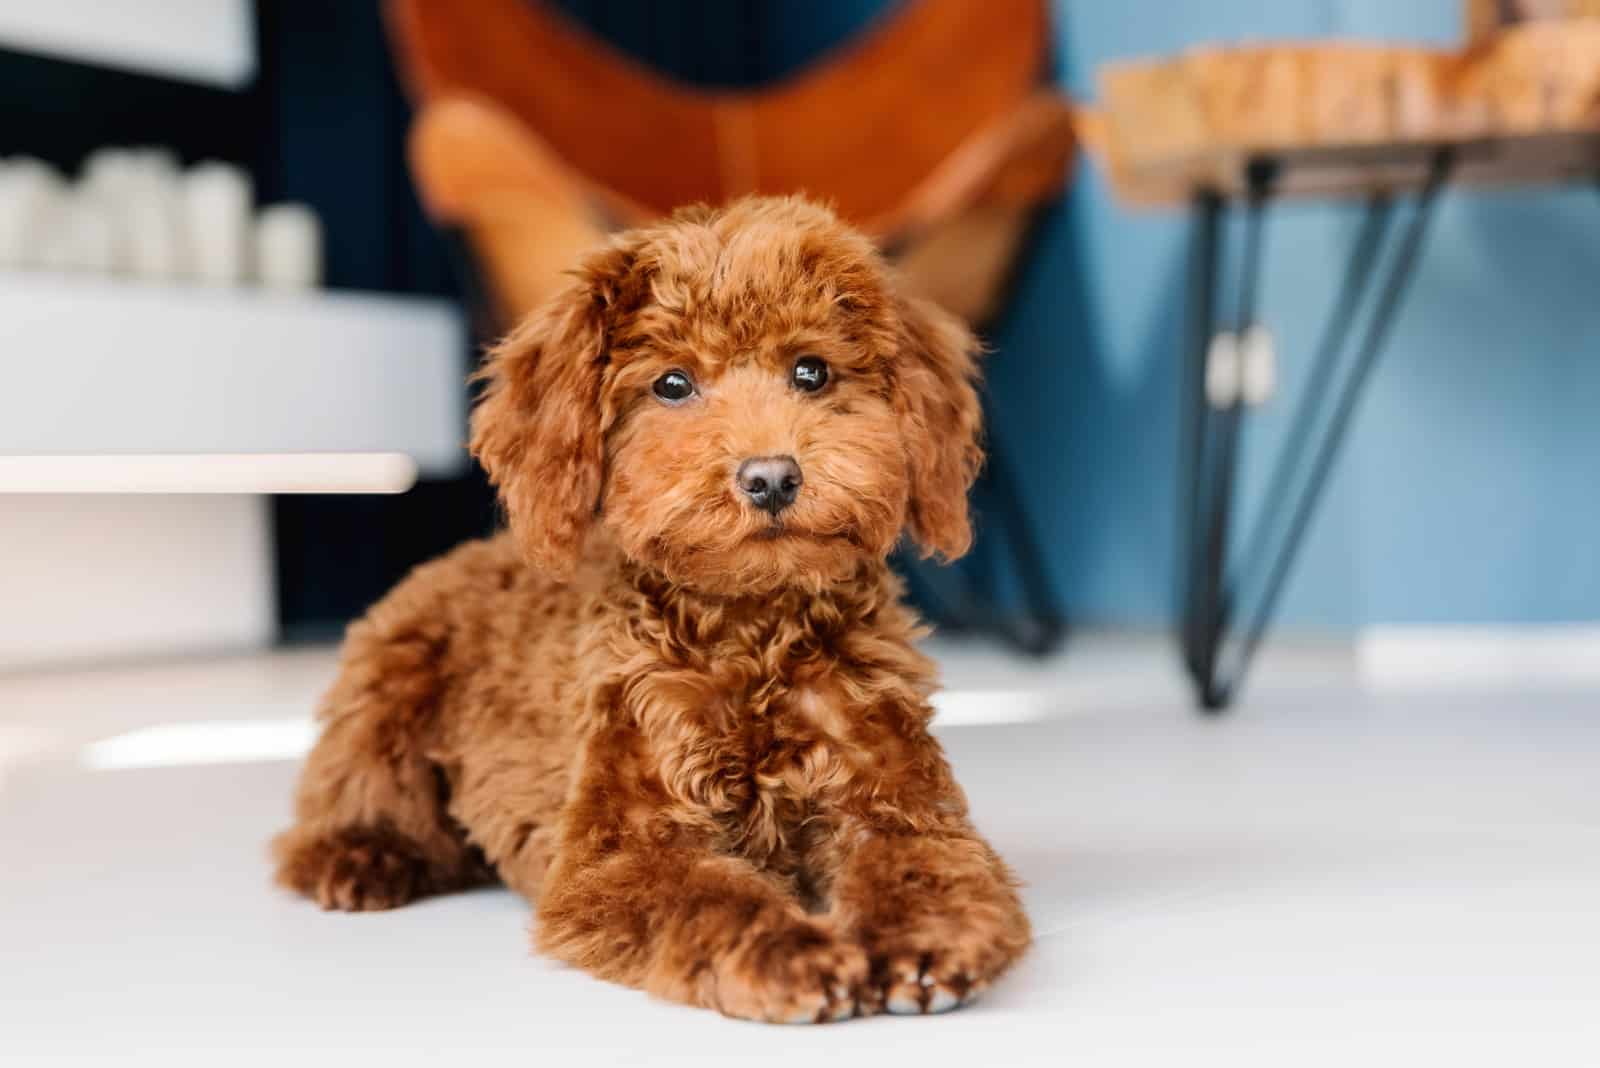 Red Toy Poodle pup at home